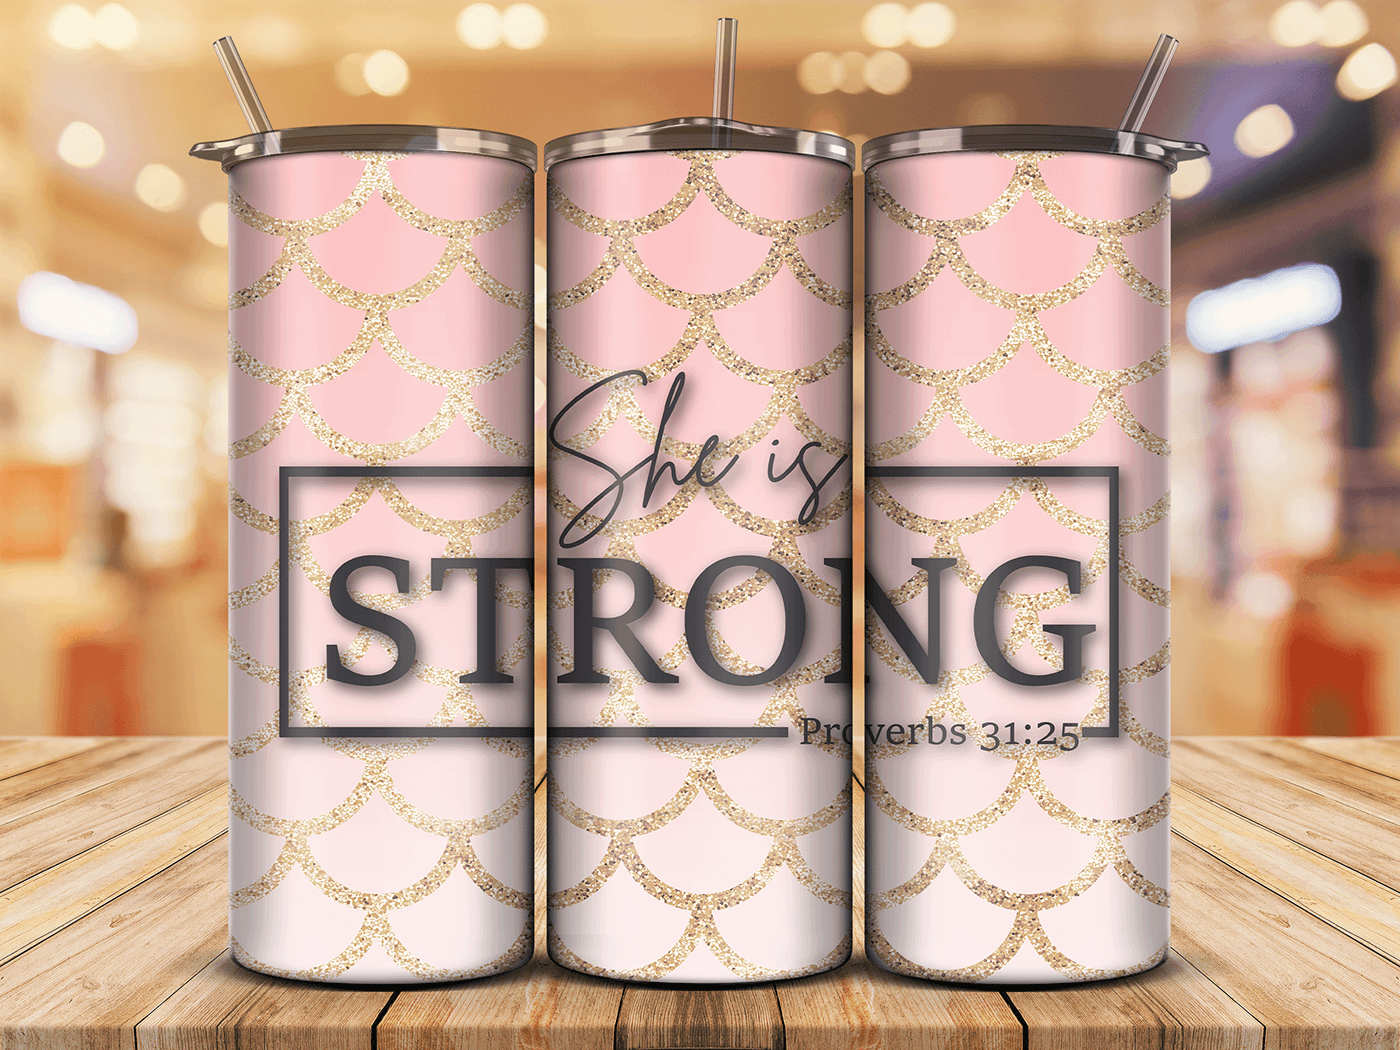 Glitter mermaid pattern with the words: "She is Strong" referencing Proverbs 31:25 